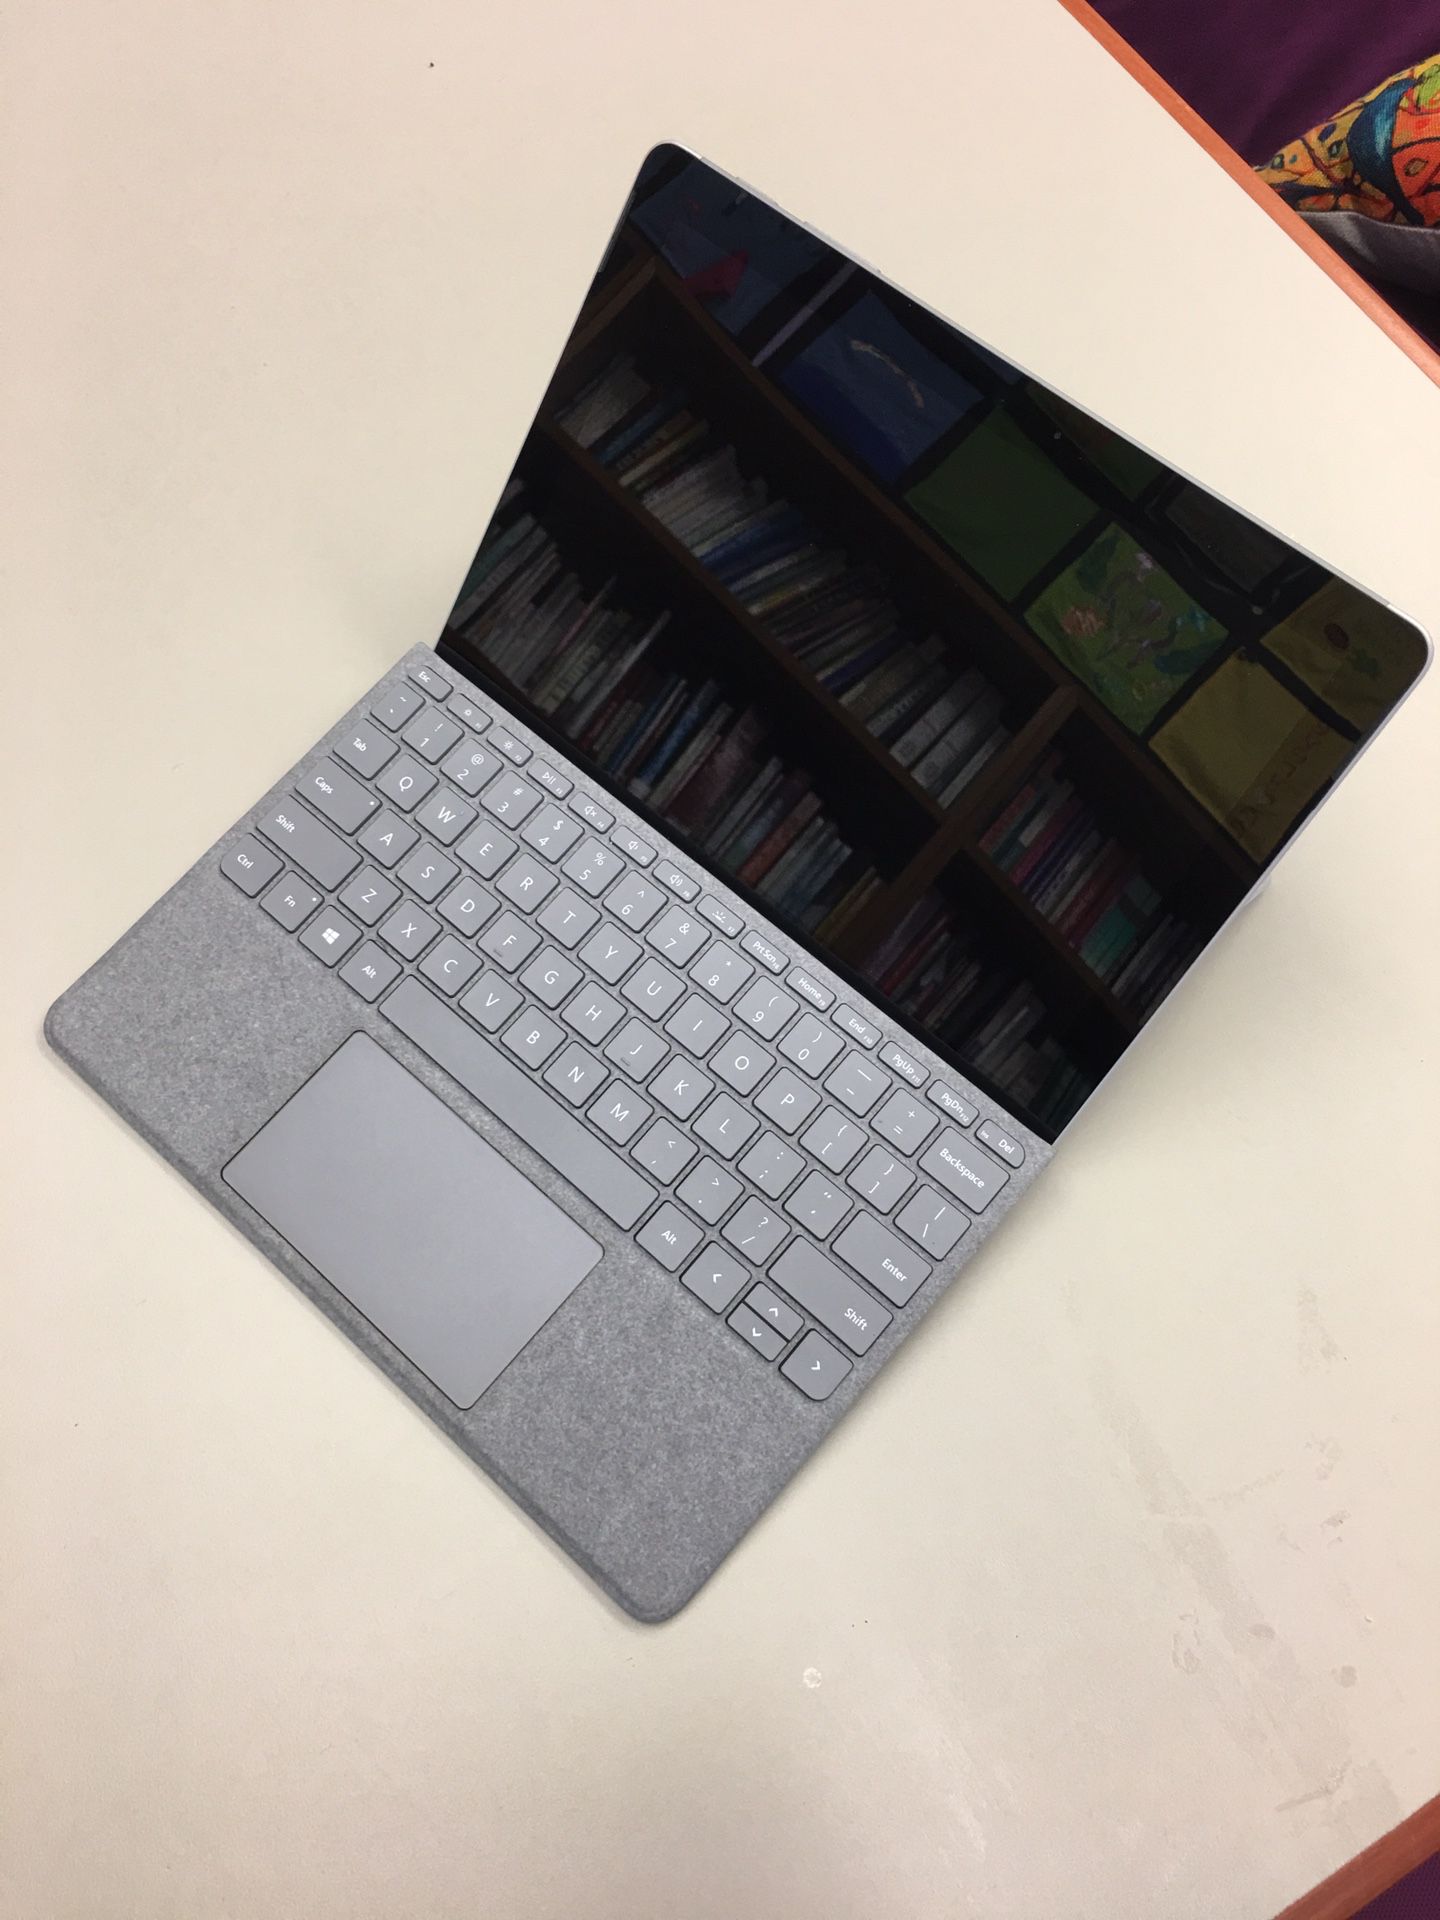 Microsoft Surface Go 10" 128GB with Keyboard (Silver)